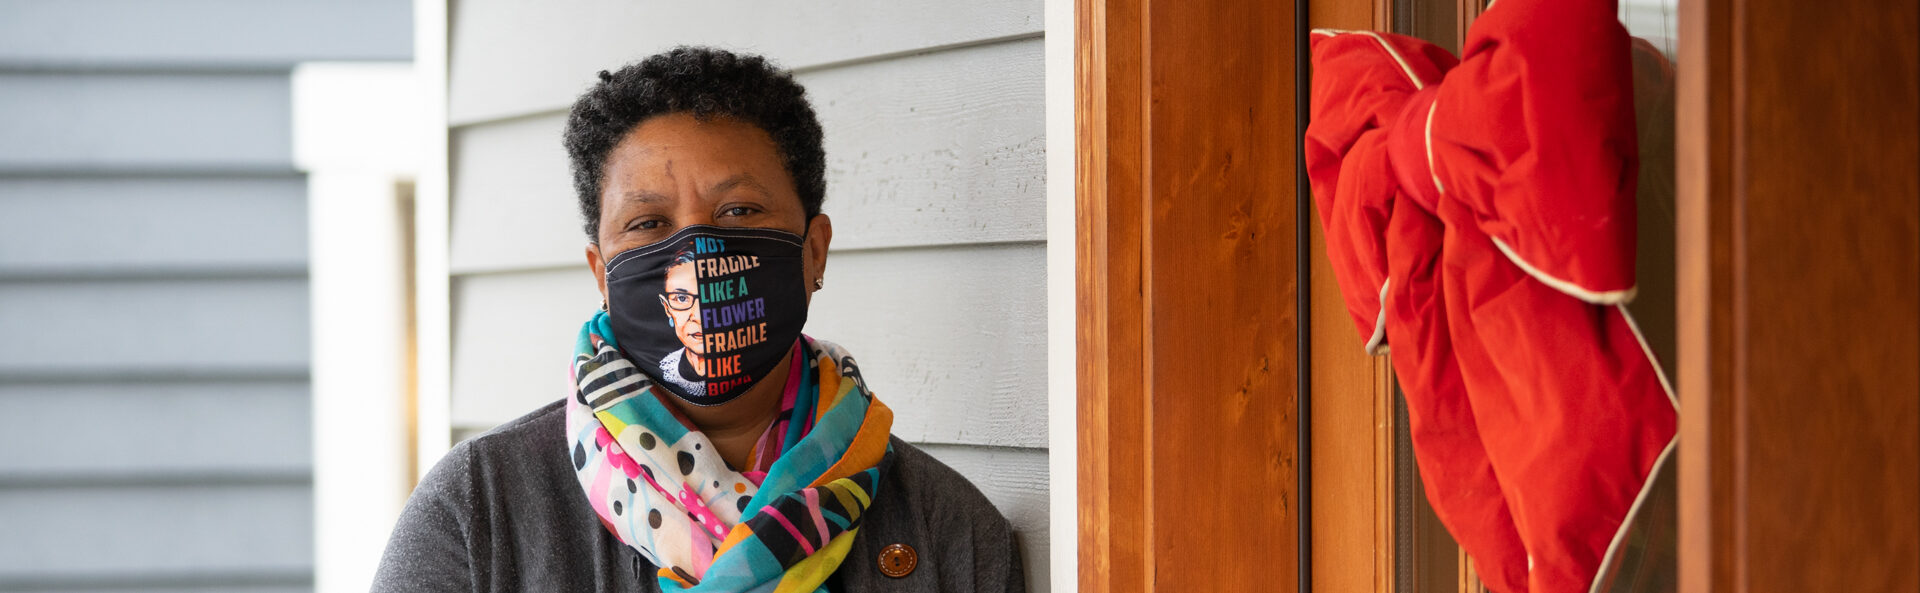 Lynda wearing a grey sweater, colorful scarf, and a face mask standing at a front door